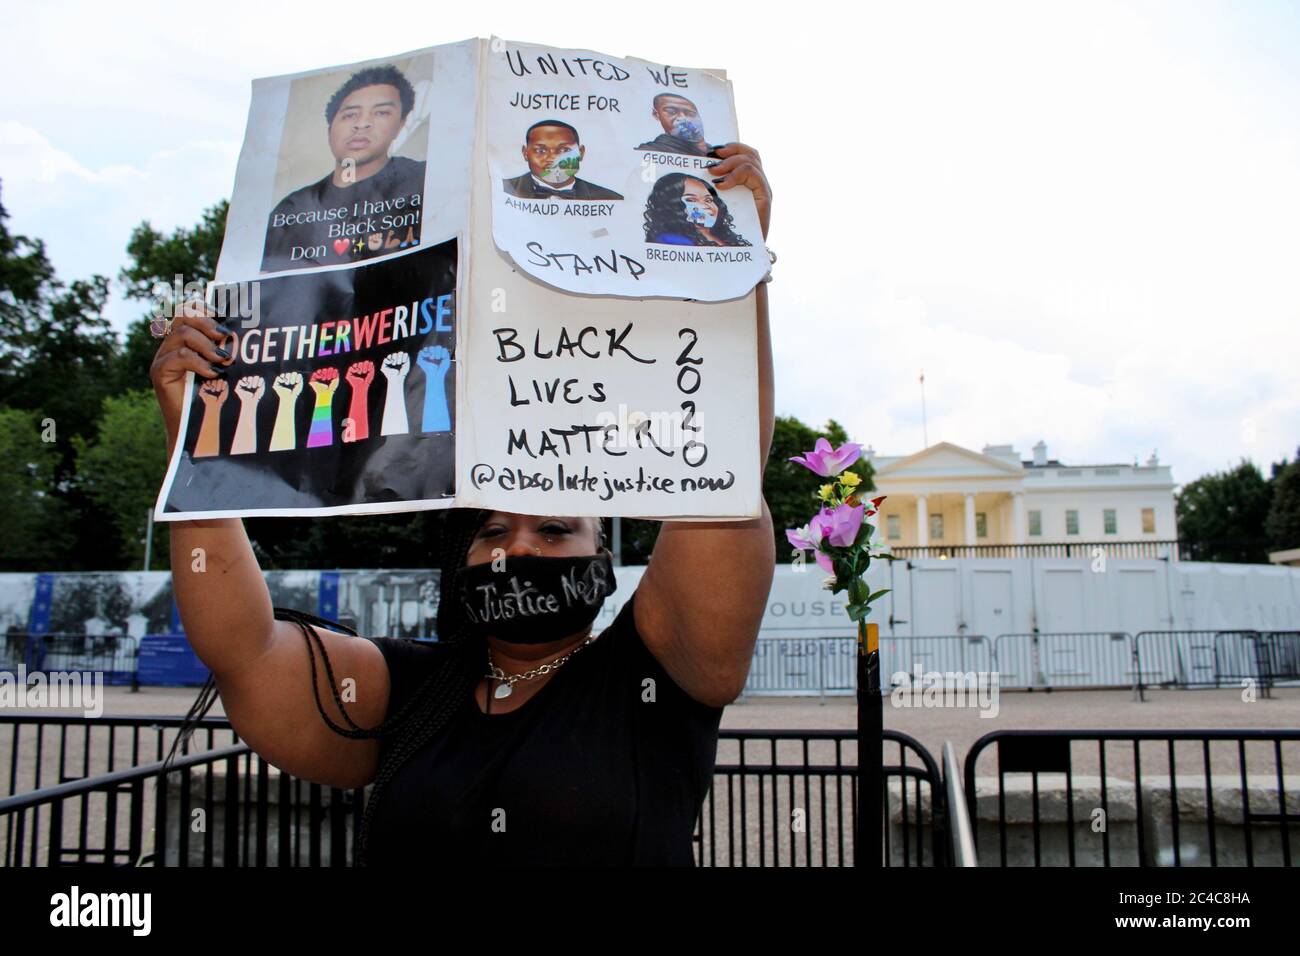 Washington D.C, District of Columbia, USA. 19th June, 2020. Shenita Binns, 13 year Federal employee, has been marching since day one in support of Black Lives Matter, She was amongst the first crowd who was pushed and tear gased in the street so Trump could walk across the street to St. JohnÃs Church for a photo op with a bible. Her teen age son is a victim of racial injustice. Credit: Amy Katz/ZUMA Wire/Alamy Live News Stock Photo